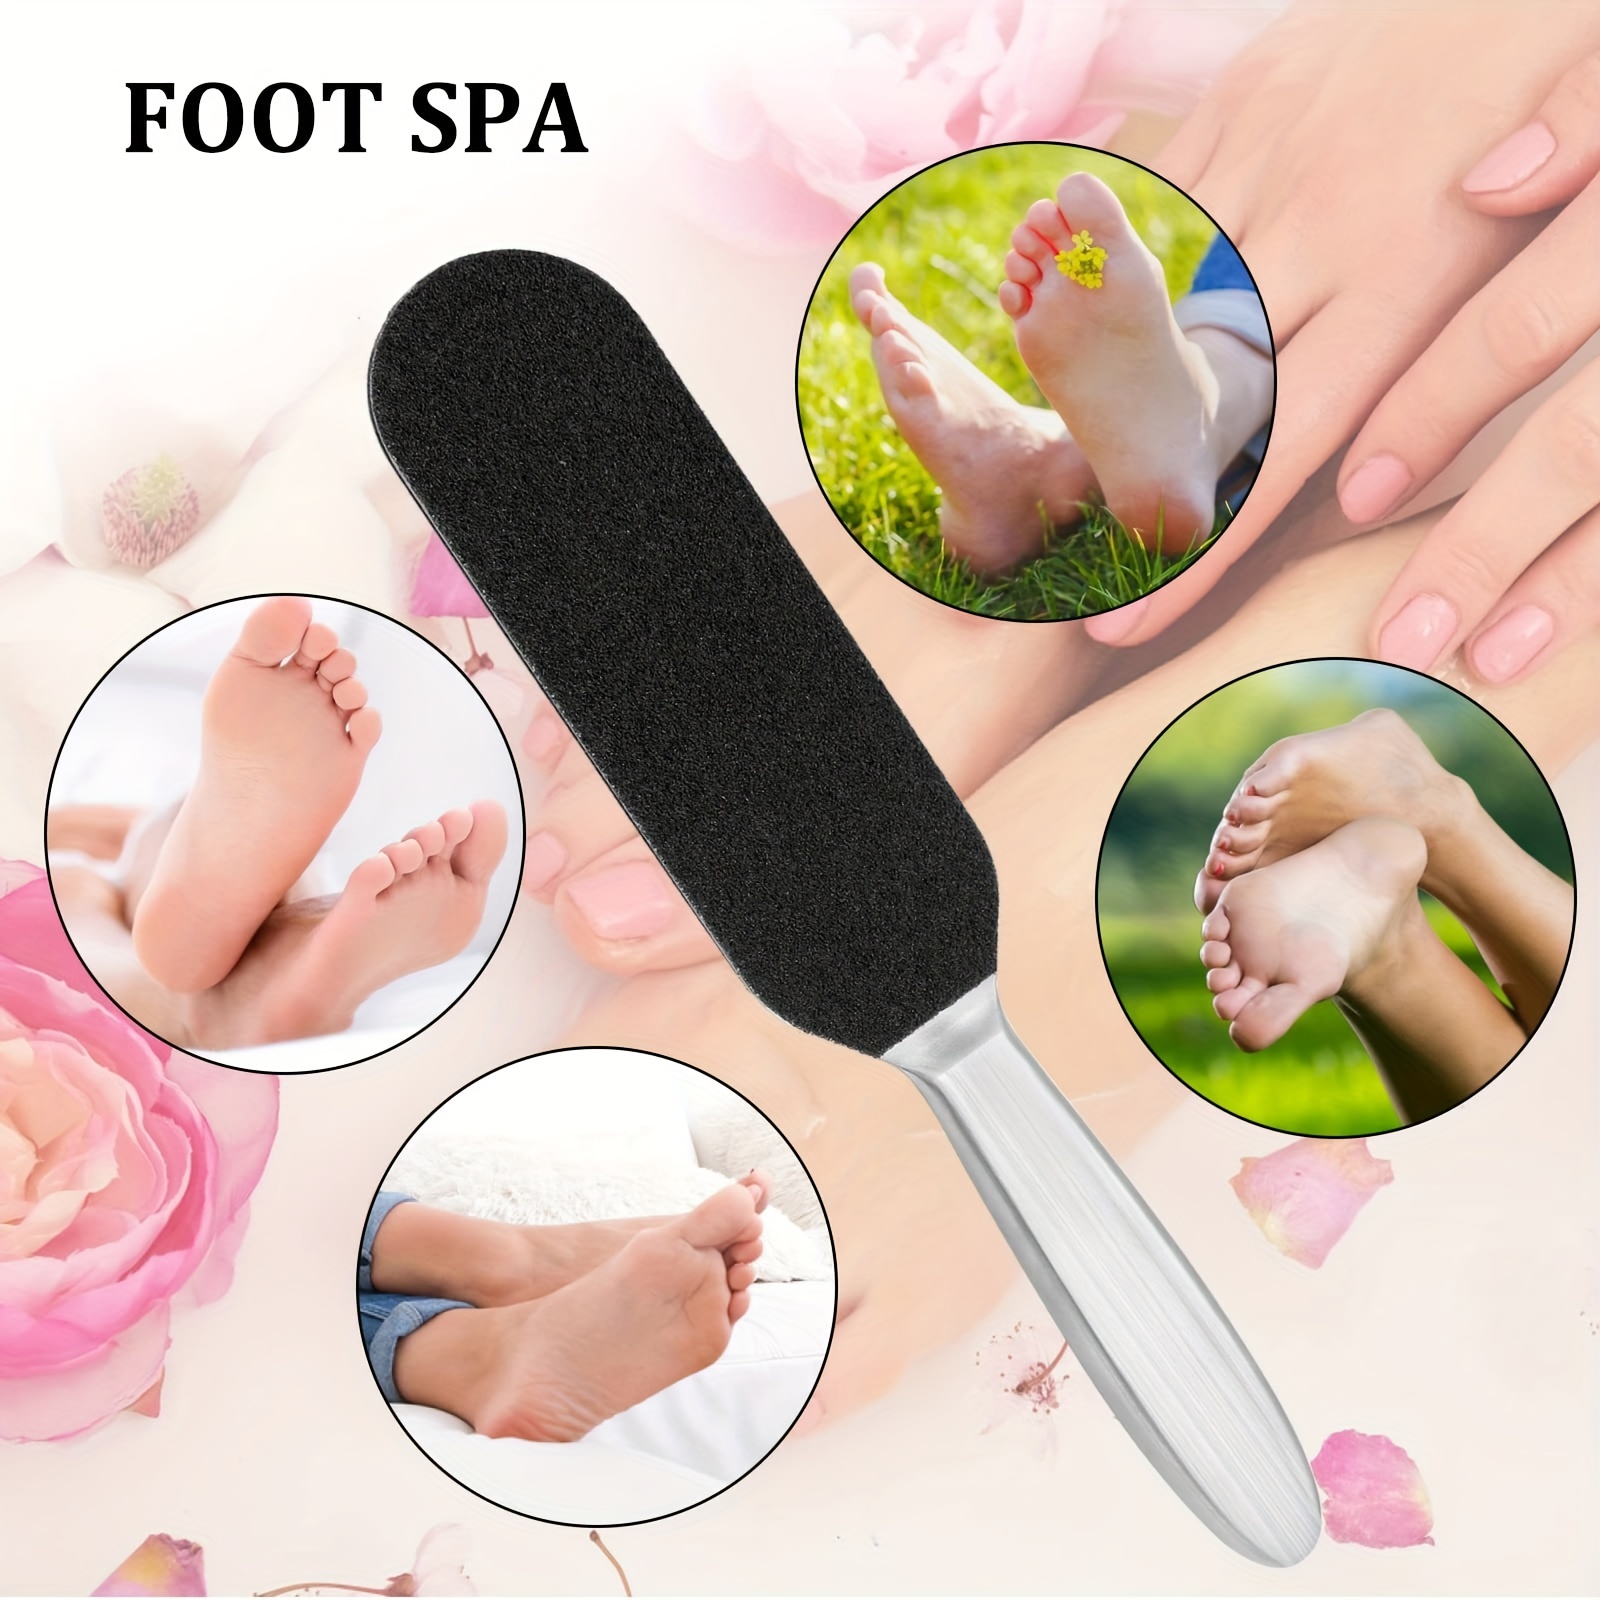 Pedicure Foot File Callus Remover For Dead Skin, Stainless Steel Foot Rasp  Scrubber With 10pcs Free Refill Grits Replacement Pads